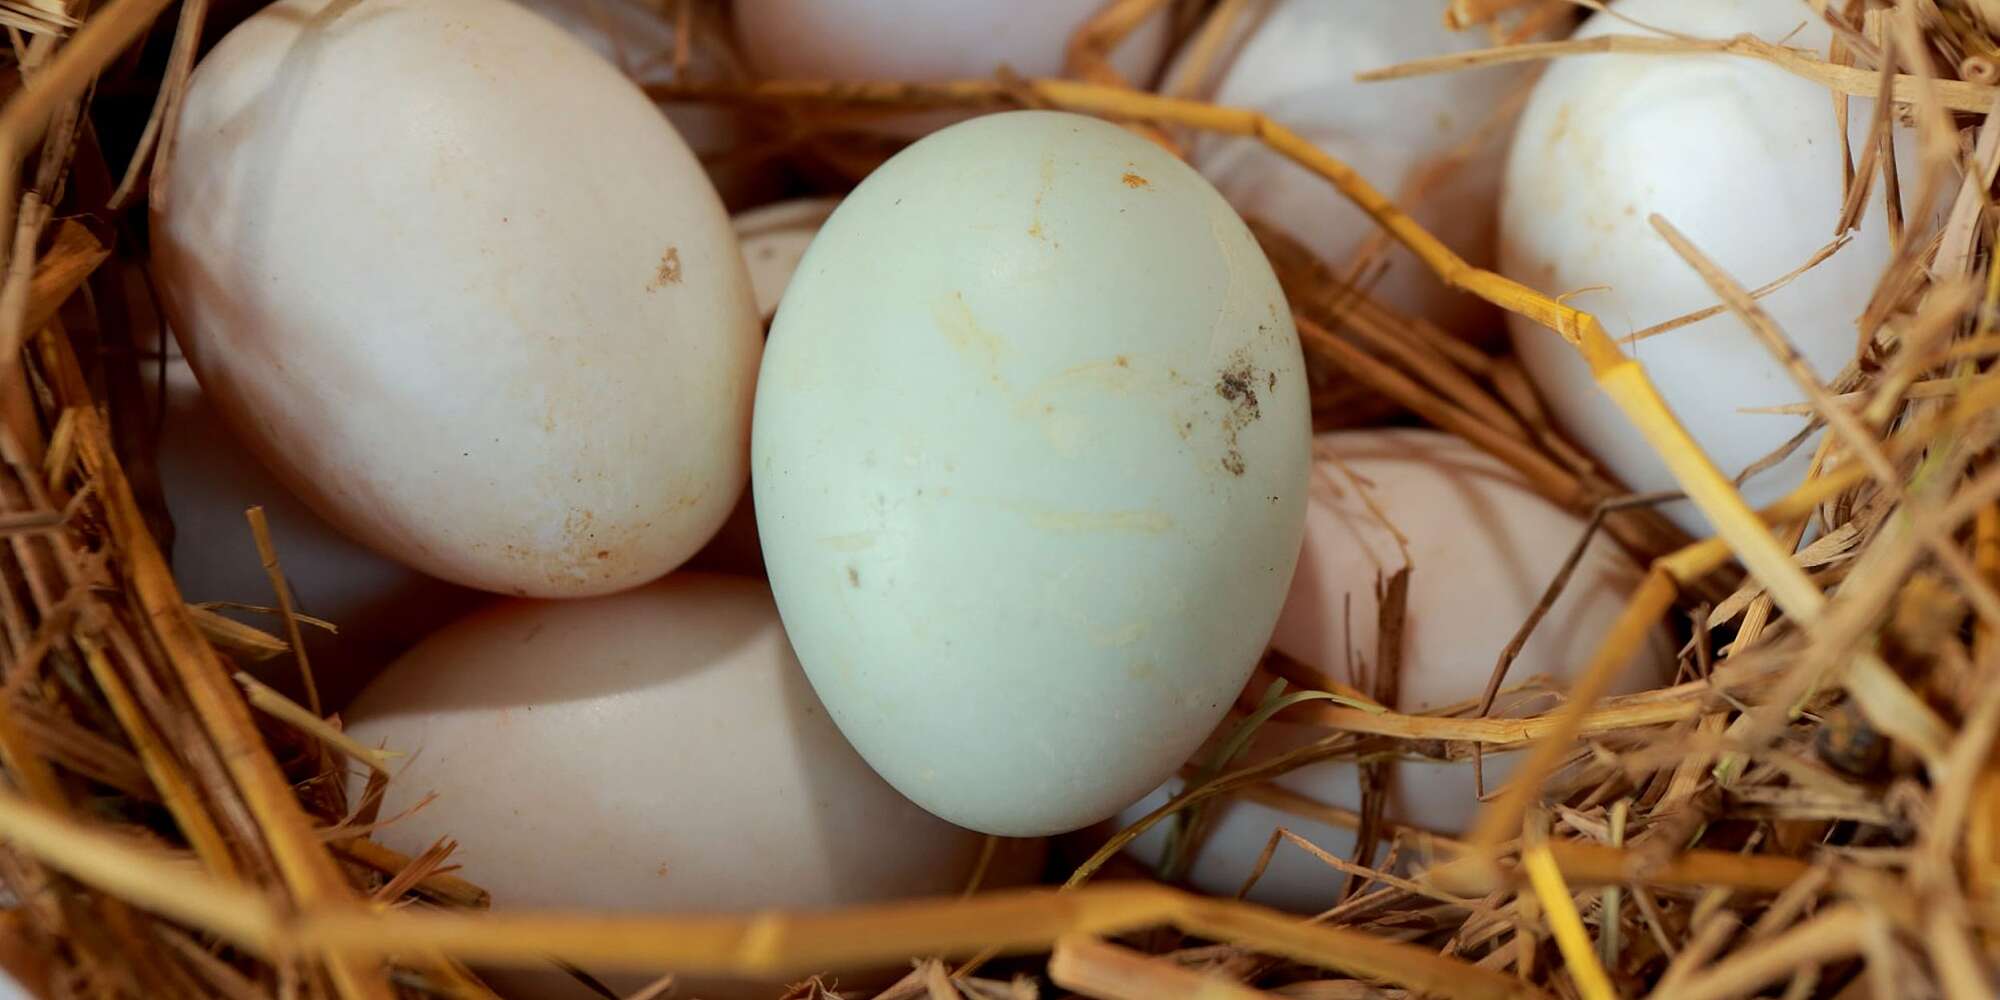 How to Wash Fresh Eggs and When It's Best to Leave Them Unwashed